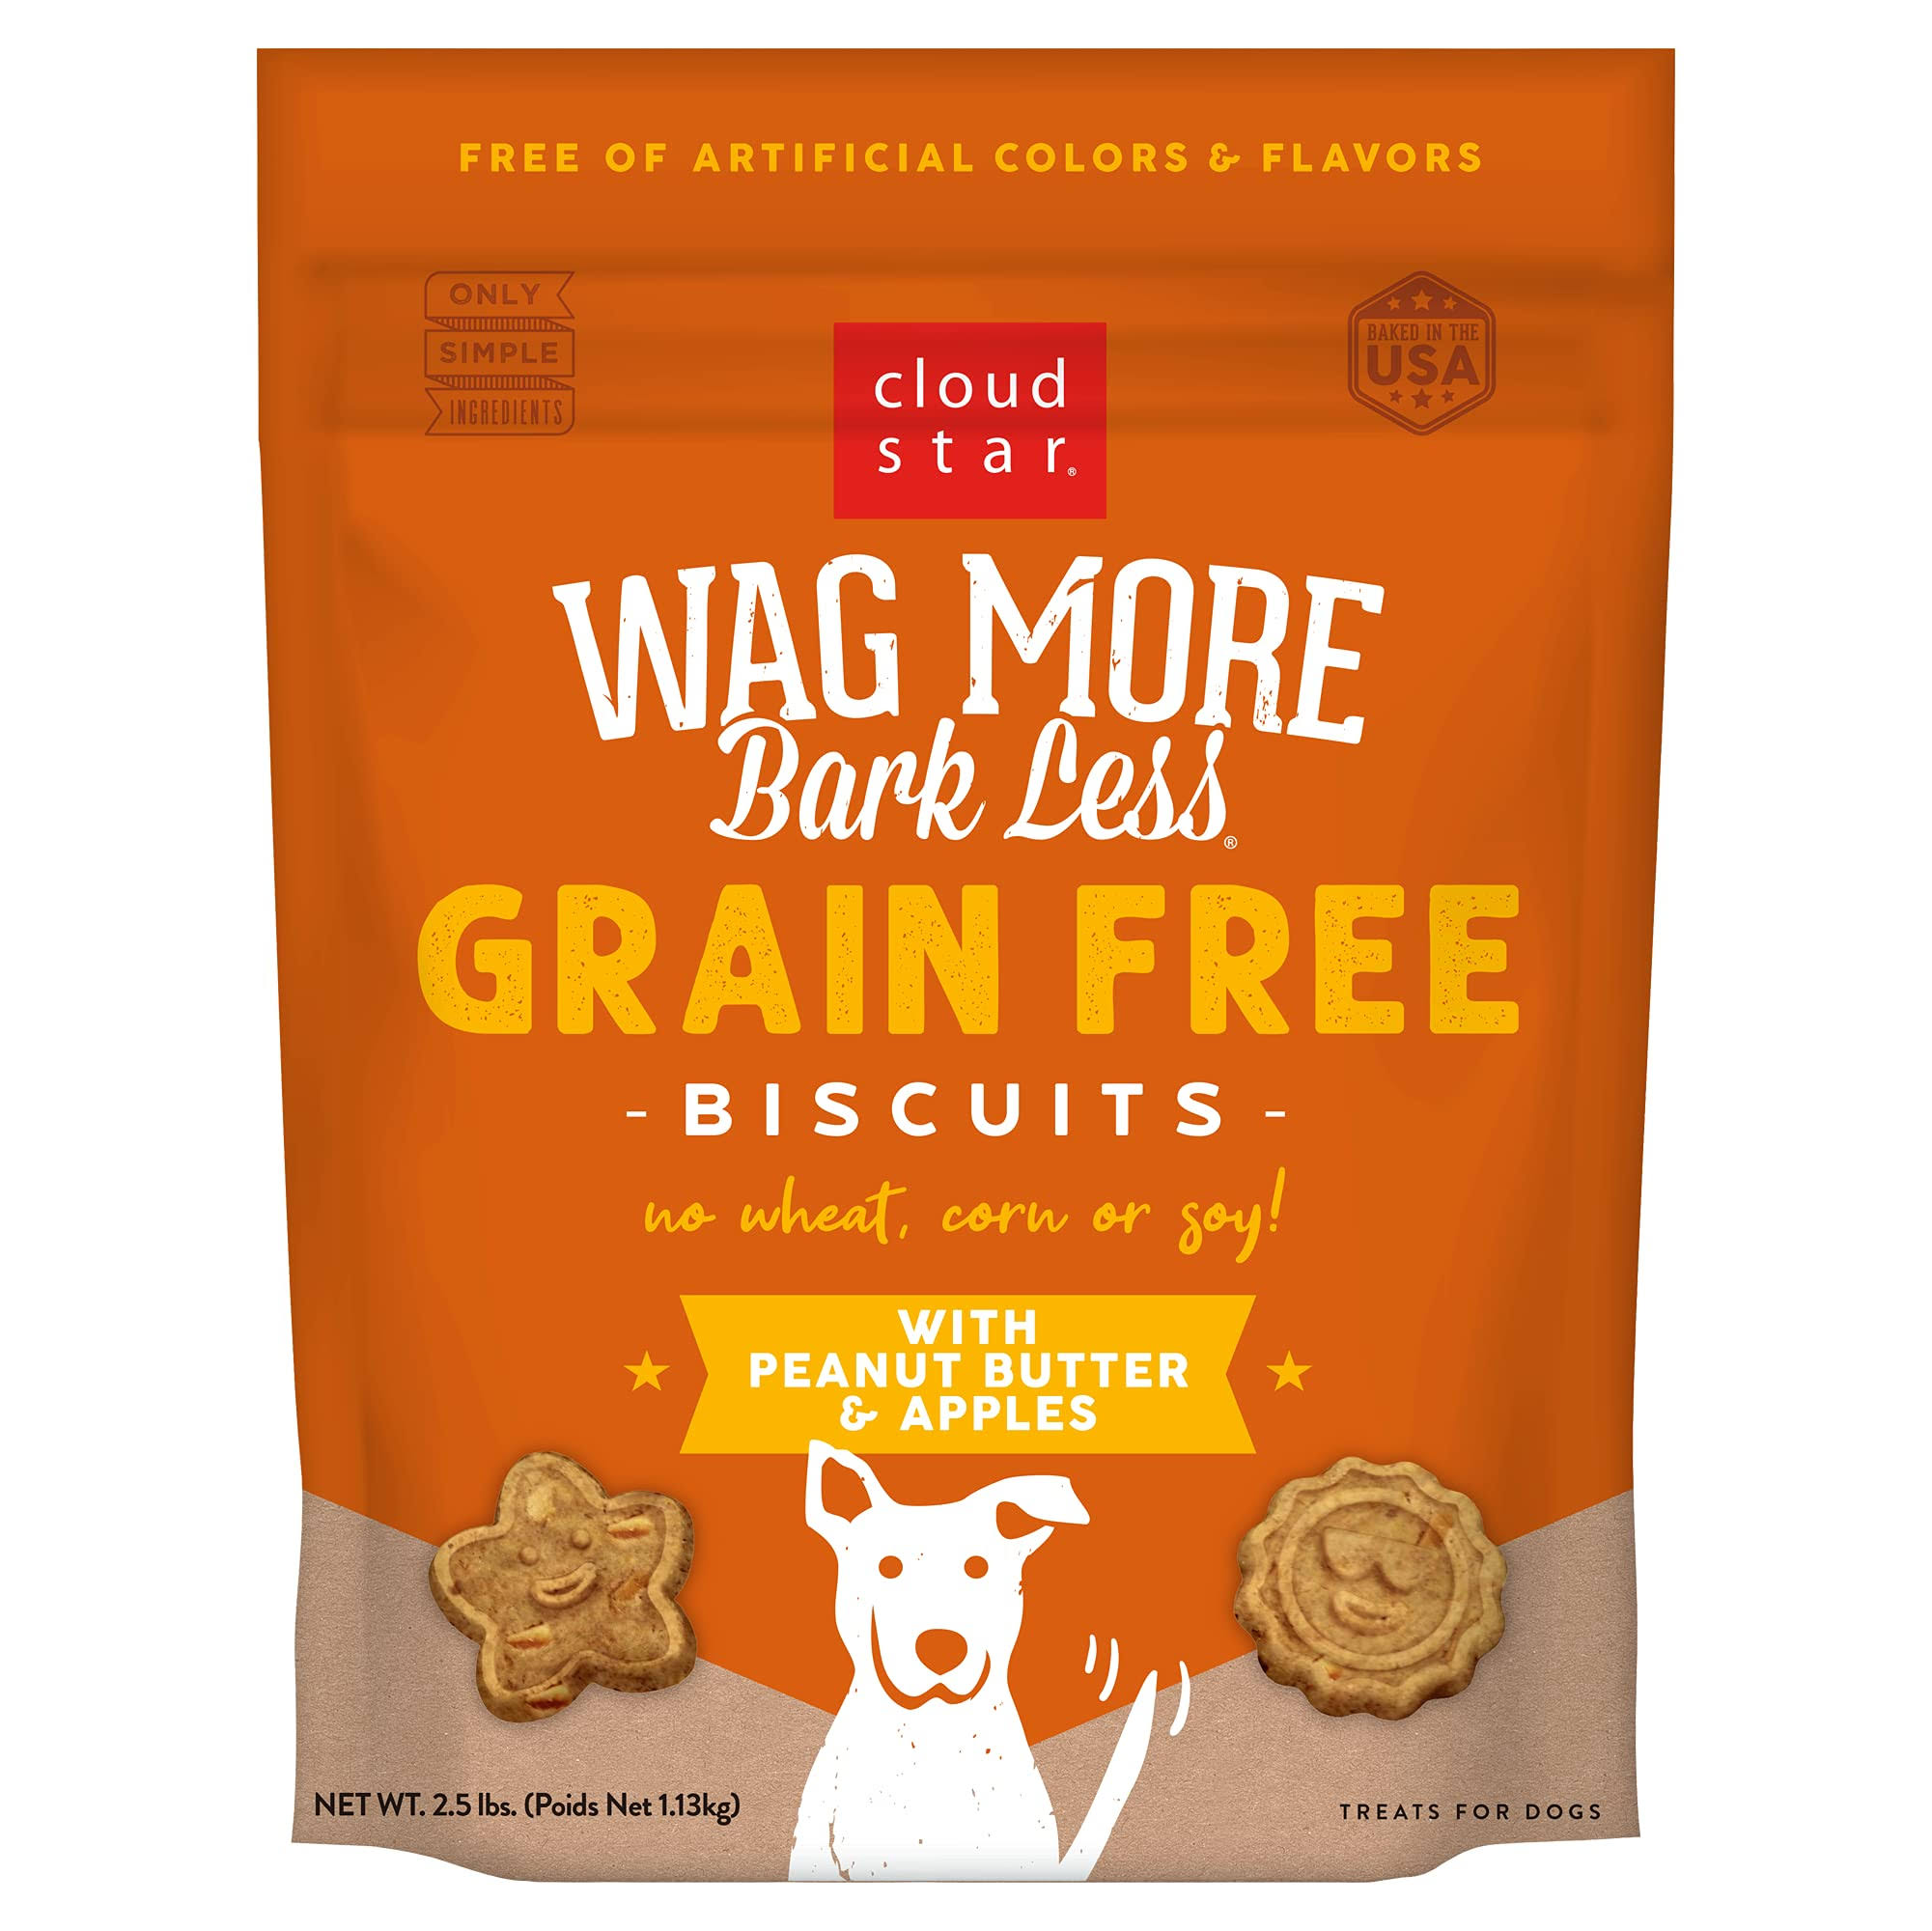 Cloud Star Wag More Bark Less Oven Baked Biscuits, Grain Free Crunchy Dog Treats, Peanut Butter & Apples - 2.5 LB